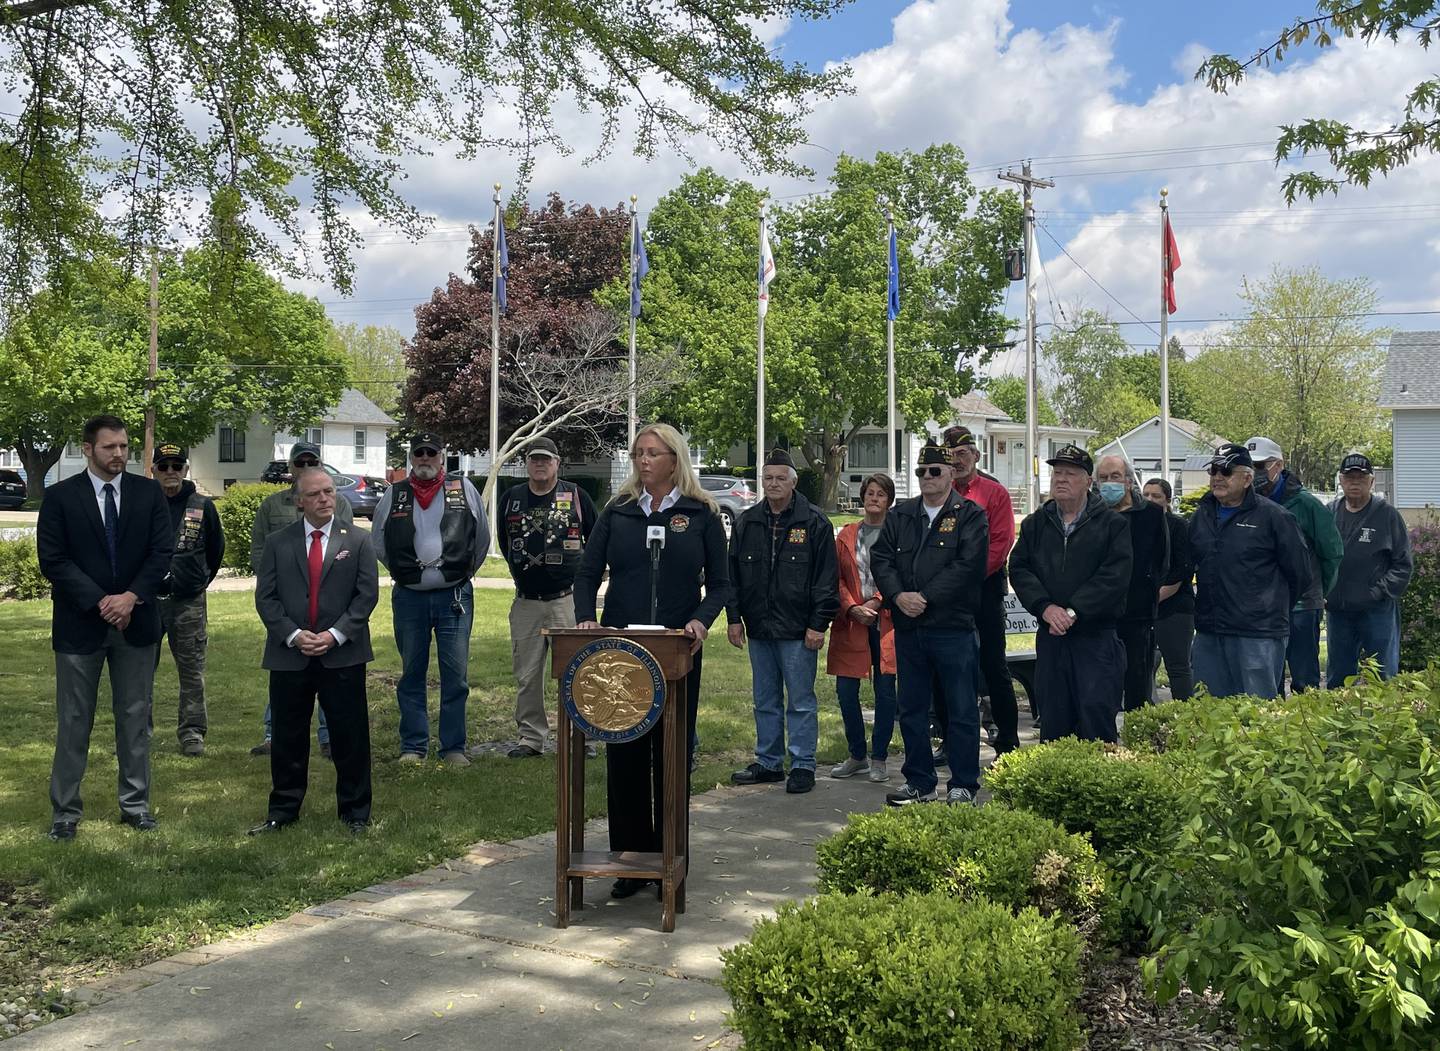 Illinois State Senator Sue Rezin (R-Morris) joined by several veteran organizations, who stand united to call for accountability and the passage of life-saving legislation in response to the deadly LaSalle Veterans’ Home COVID-19 outbreak at the Illinois Veterans home in La Salle on Monday May 5, 2021.